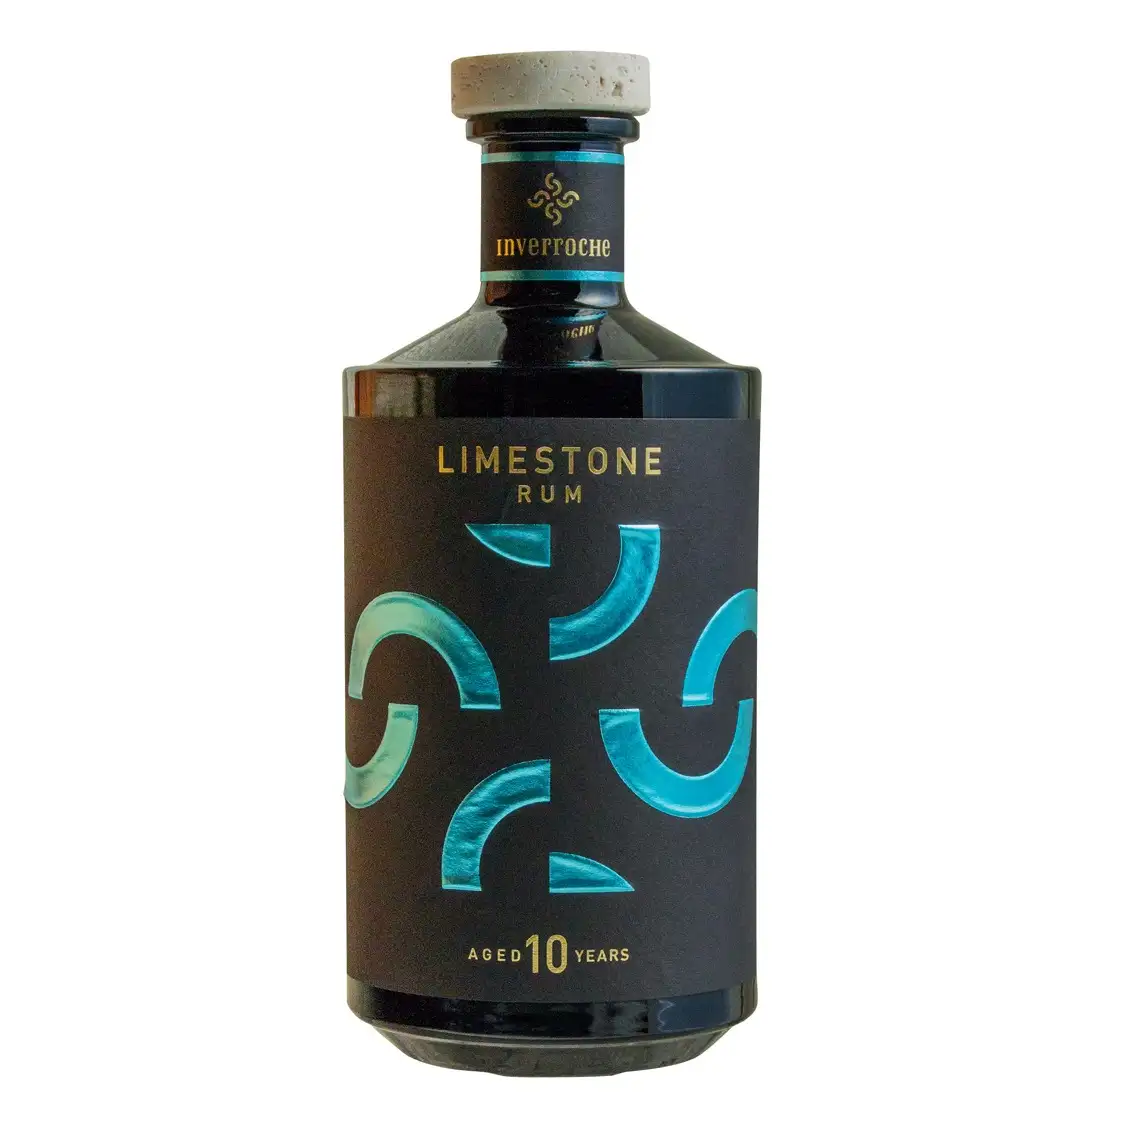 Image of the front of the bottle of the rum Limestone Rum